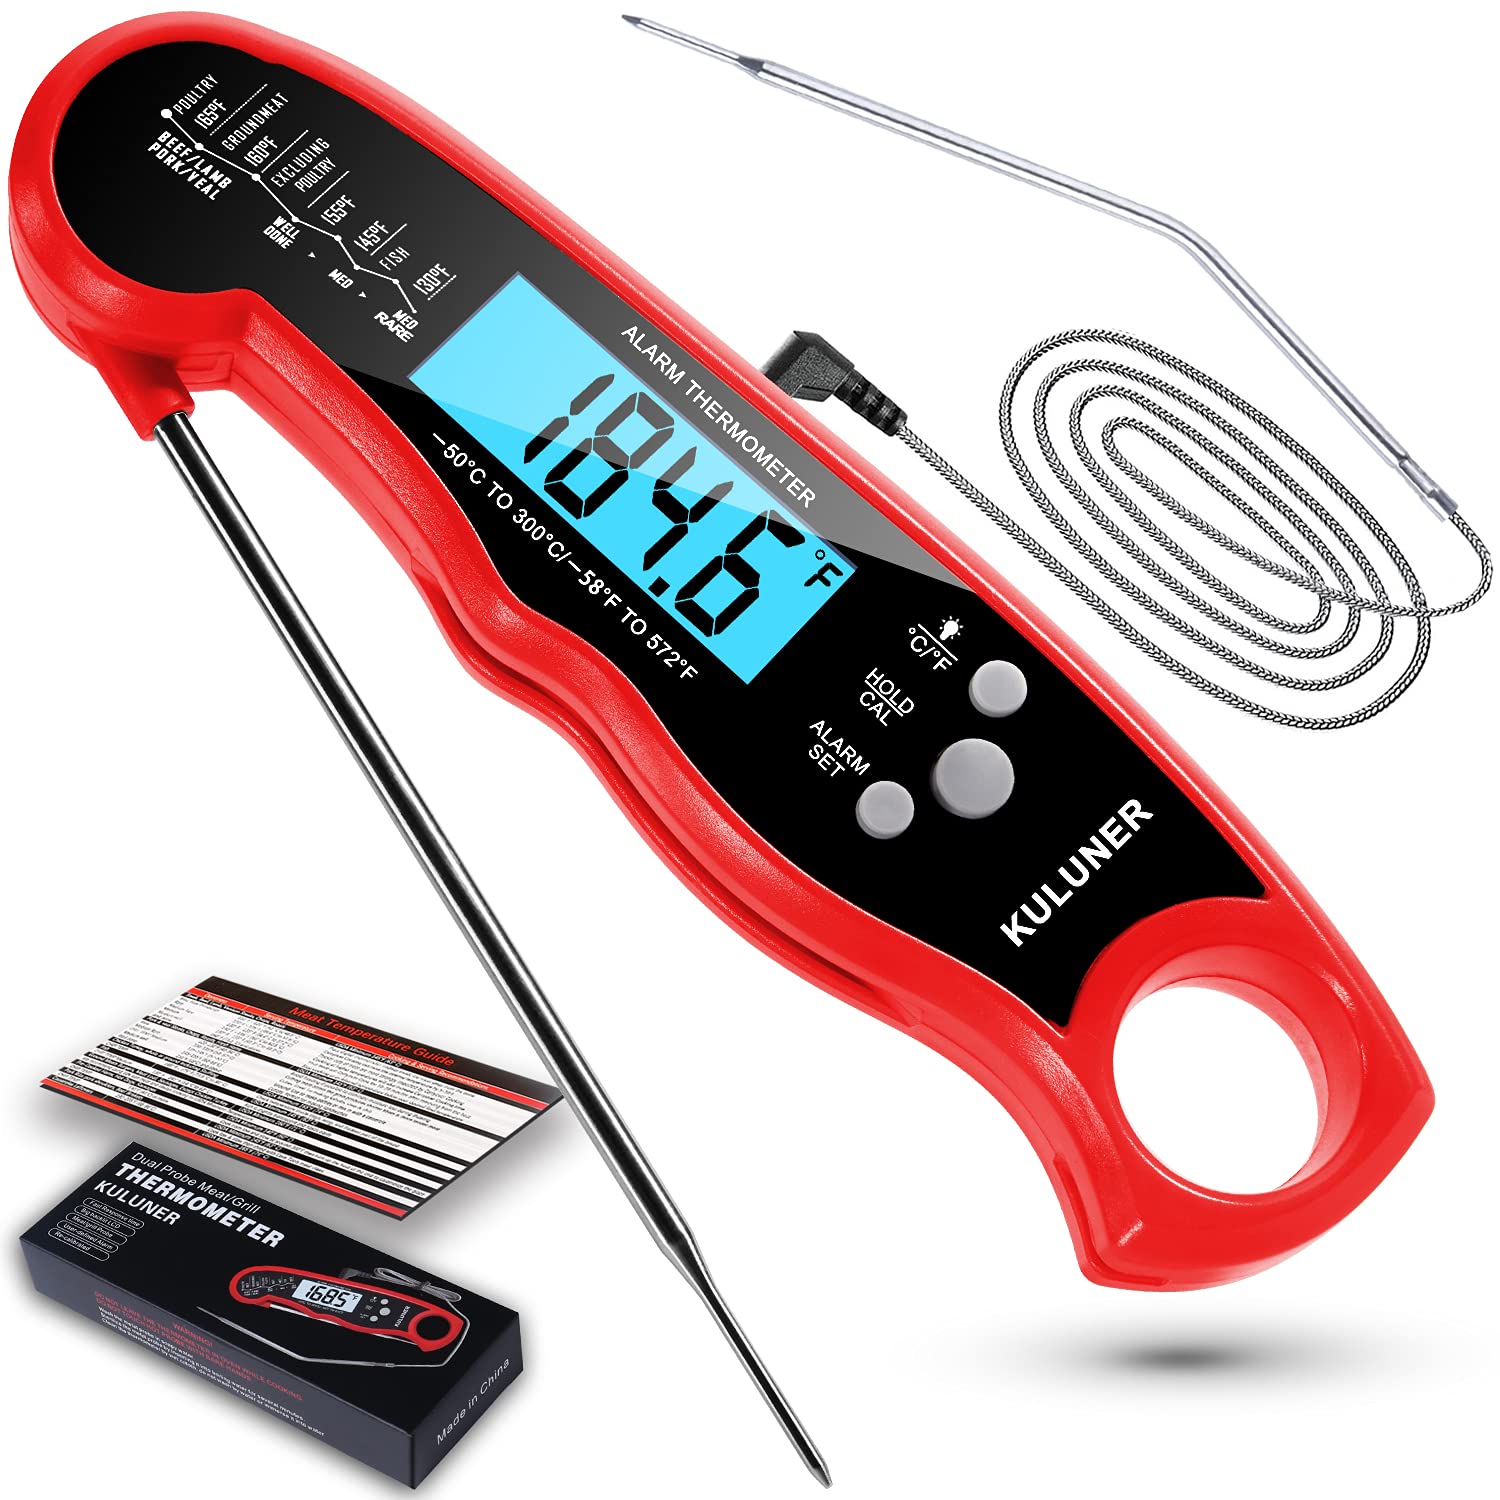 KAIWEETS KMT02 Meat Waterproof Instant Read Thermometer Digital